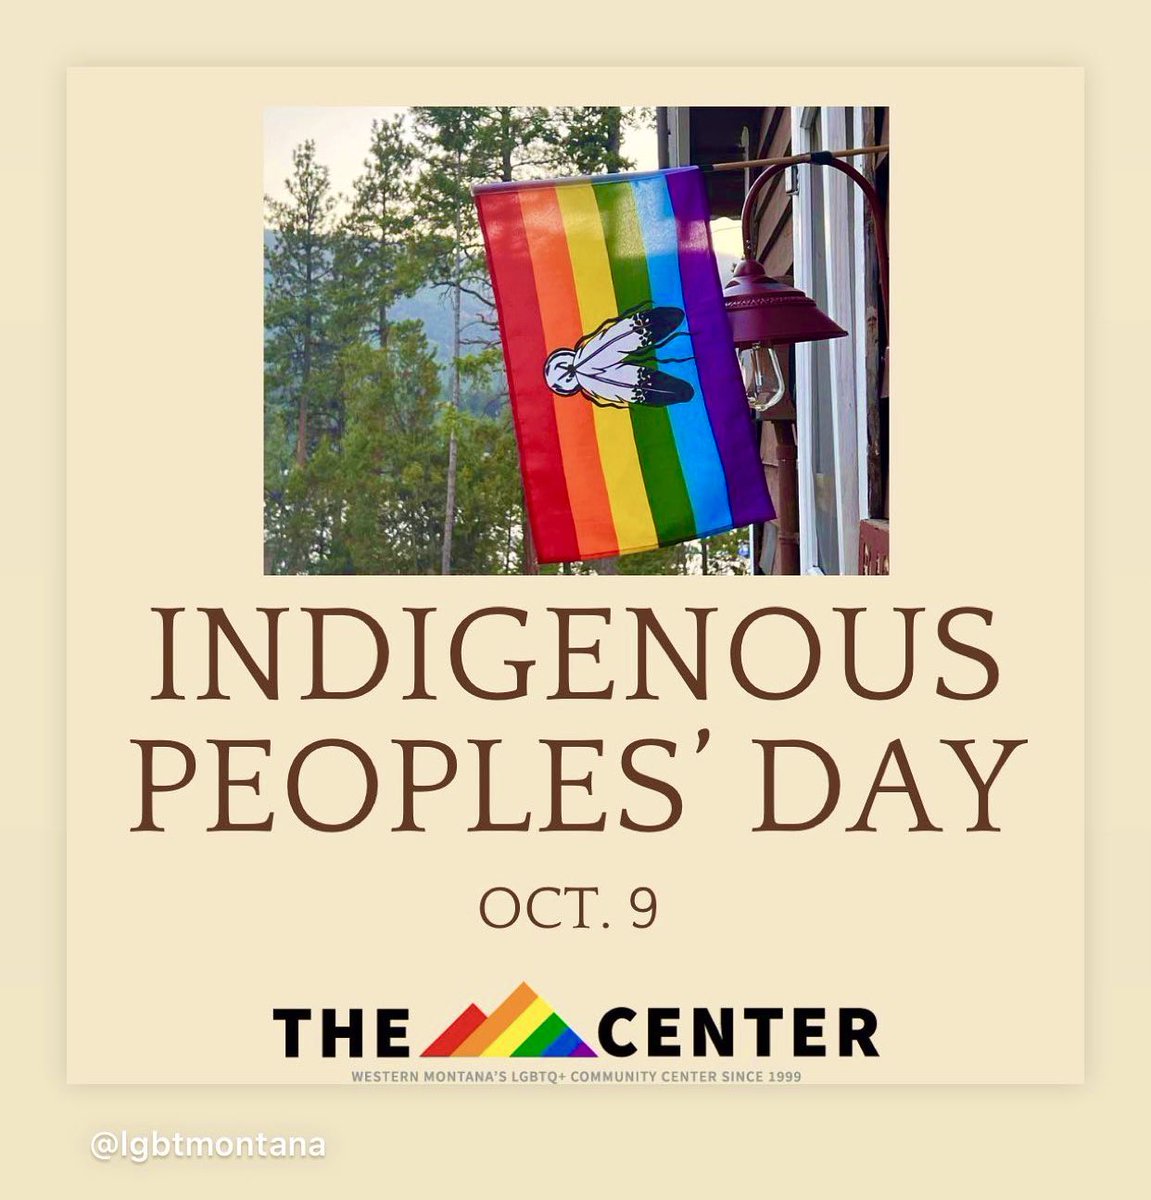 Wishing all my Two-Spirit brothers and sisters an incredibly beautiful Indigenous Peoples Day. I see you — I celebrate you. 🌈🏳️‍⚧️